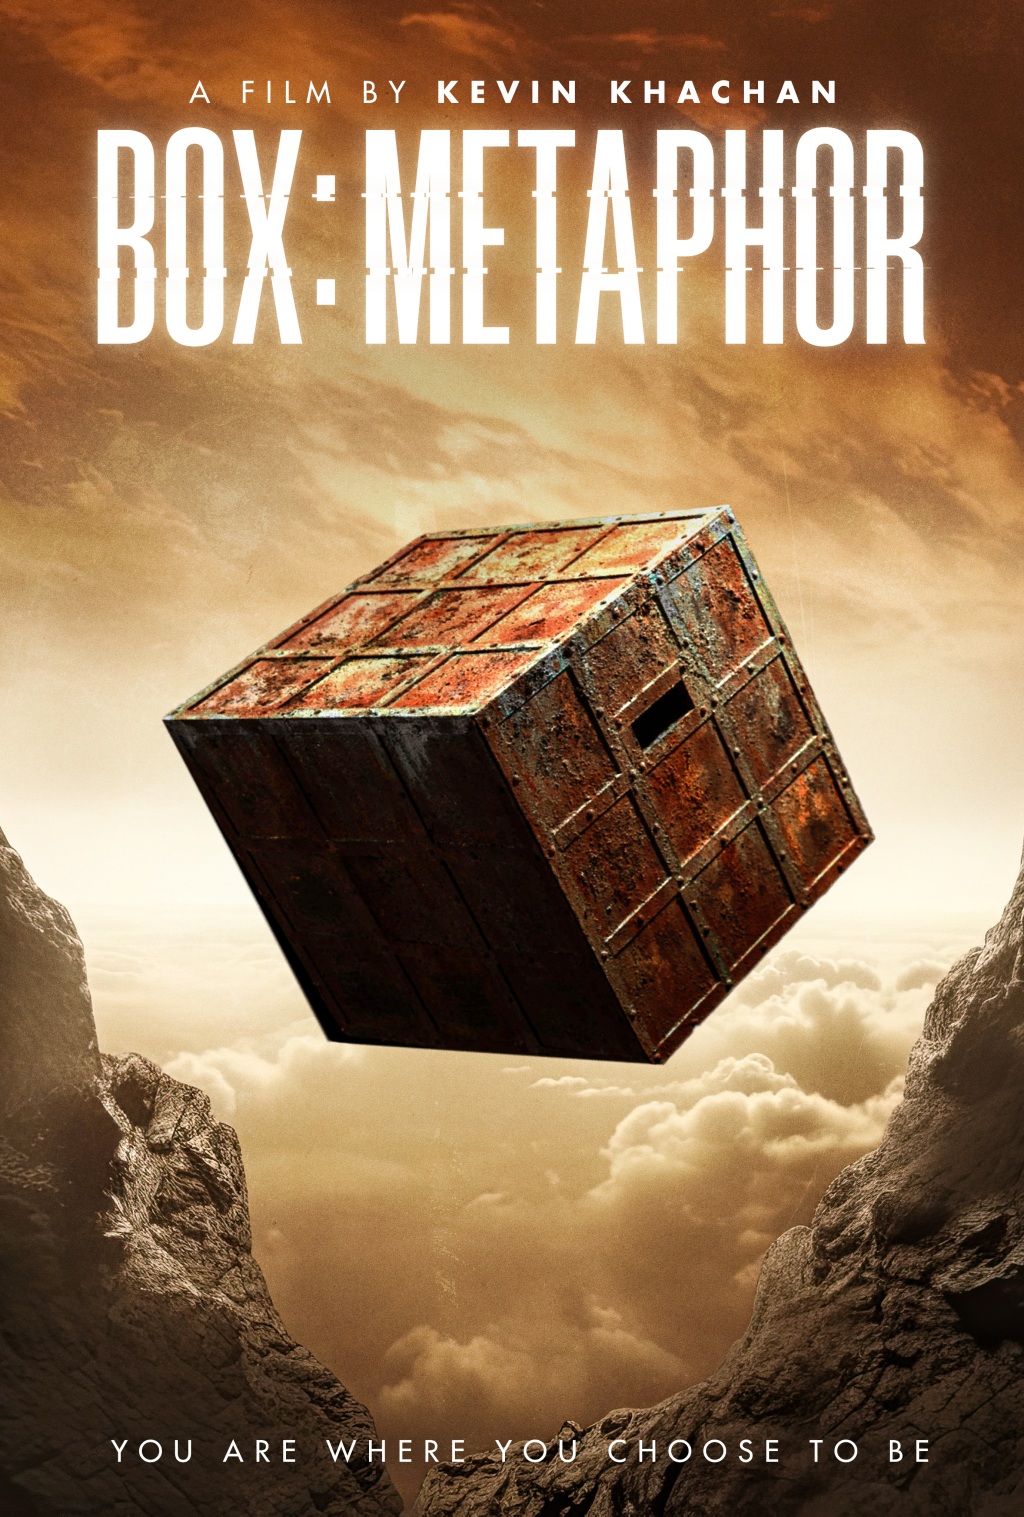 Box:Metaphor Review — Interesting concept… poorly executed